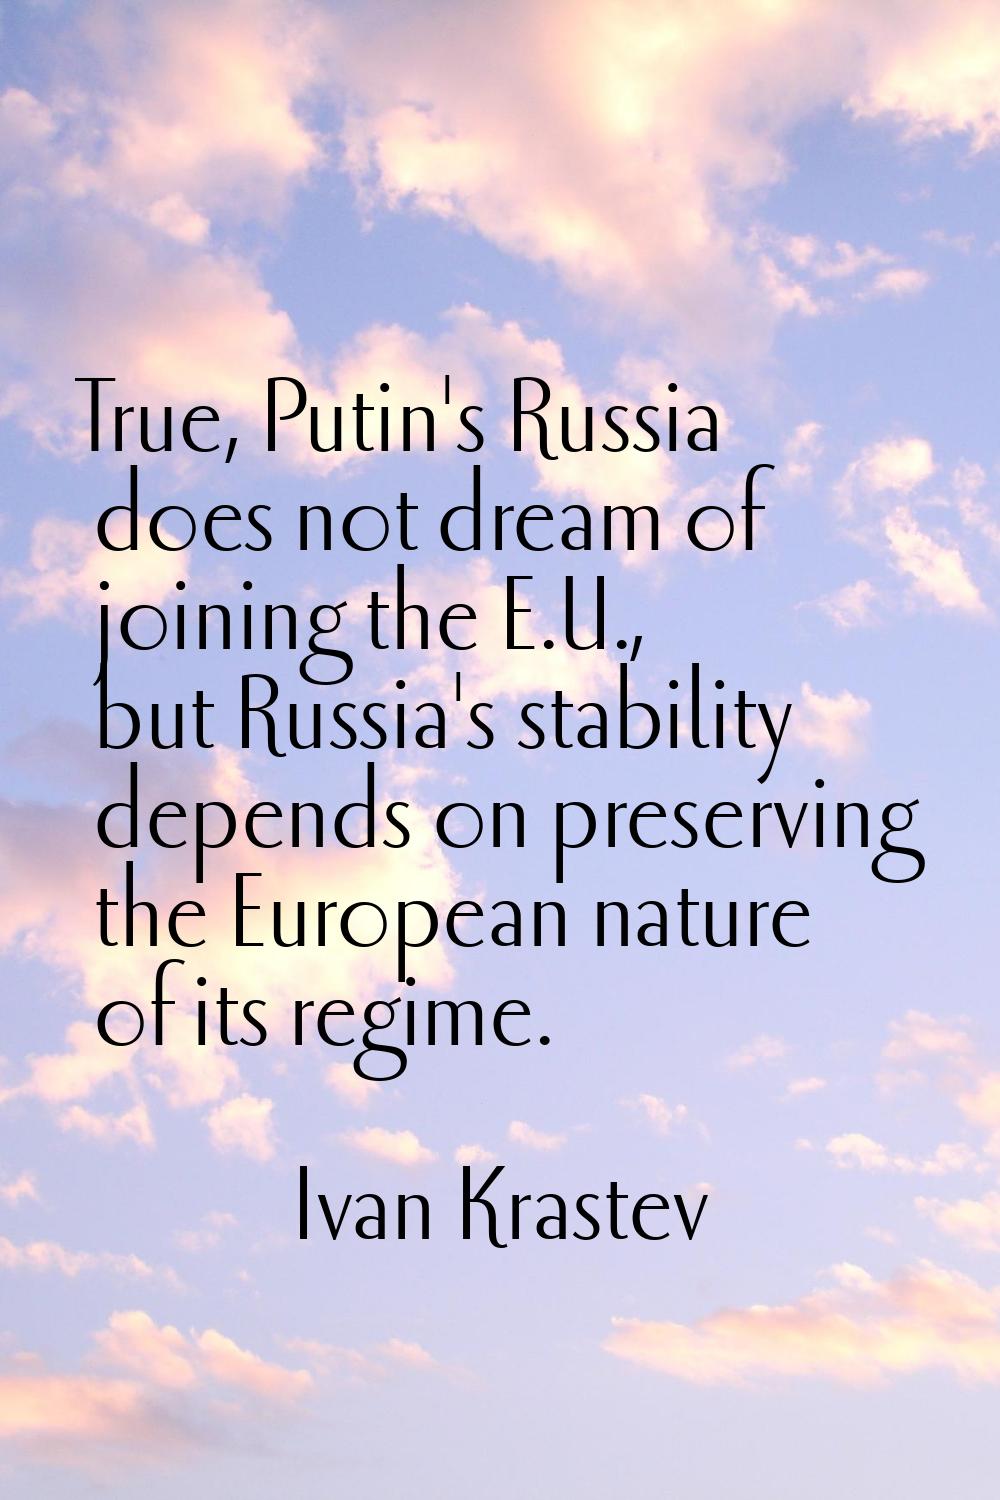 True, Putin's Russia does not dream of joining the E.U., but Russia's stability depends on preservi